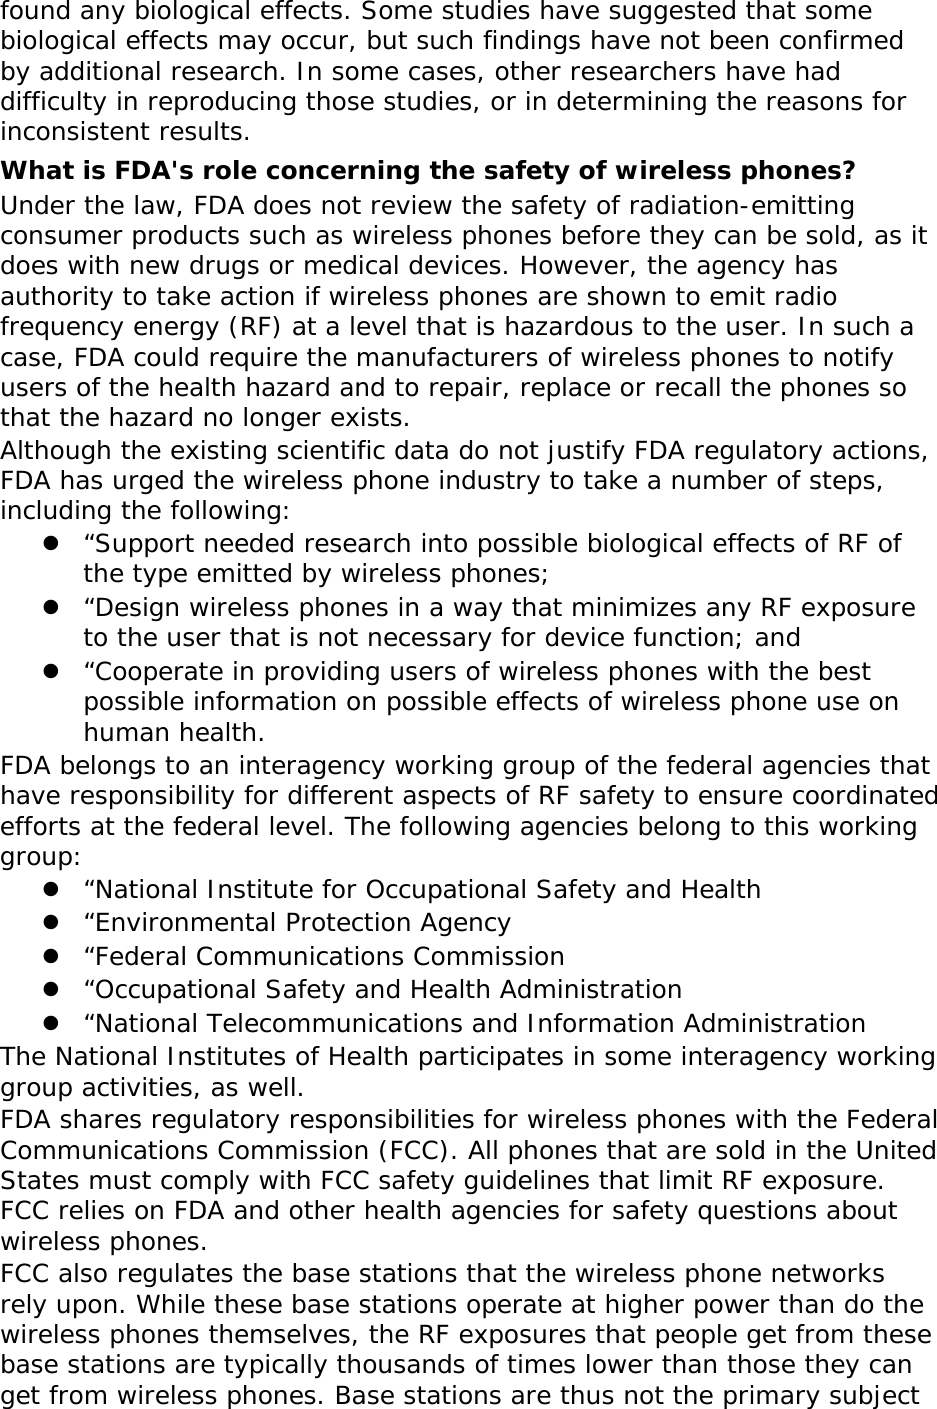 found any biological effects. Some studies have suggested that some biological effects may occur, but such findings have not been confirmed by additional research. In some cases, other researchers have had difficulty in reproducing those studies, or in determining the reasons for inconsistent results. What is FDA&apos;s role concerning the safety of wireless phones? Under the law, FDA does not review the safety of radiation-emitting consumer products such as wireless phones before they can be sold, as it does with new drugs or medical devices. However, the agency has authority to take action if wireless phones are shown to emit radio frequency energy (RF) at a level that is hazardous to the user. In such a case, FDA could require the manufacturers of wireless phones to notify users of the health hazard and to repair, replace or recall the phones so that the hazard no longer exists. Although the existing scientific data do not justify FDA regulatory actions, FDA has urged the wireless phone industry to take a number of steps, including the following:  “Support needed research into possible biological effects of RF of the type emitted by wireless phones;  “Design wireless phones in a way that minimizes any RF exposure to the user that is not necessary for device function; and  “Cooperate in providing users of wireless phones with the best possible information on possible effects of wireless phone use on human health. FDA belongs to an interagency working group of the federal agencies that have responsibility for different aspects of RF safety to ensure coordinated efforts at the federal level. The following agencies belong to this working group:  “National Institute for Occupational Safety and Health  “Environmental Protection Agency  “Federal Communications Commission  “Occupational Safety and Health Administration  “National Telecommunications and Information Administration The National Institutes of Health participates in some interagency working group activities, as well. FDA shares regulatory responsibilities for wireless phones with the Federal Communications Commission (FCC). All phones that are sold in the United States must comply with FCC safety guidelines that limit RF exposure. FCC relies on FDA and other health agencies for safety questions about wireless phones. FCC also regulates the base stations that the wireless phone networks rely upon. While these base stations operate at higher power than do the wireless phones themselves, the RF exposures that people get from these base stations are typically thousands of times lower than those they can get from wireless phones. Base stations are thus not the primary subject 